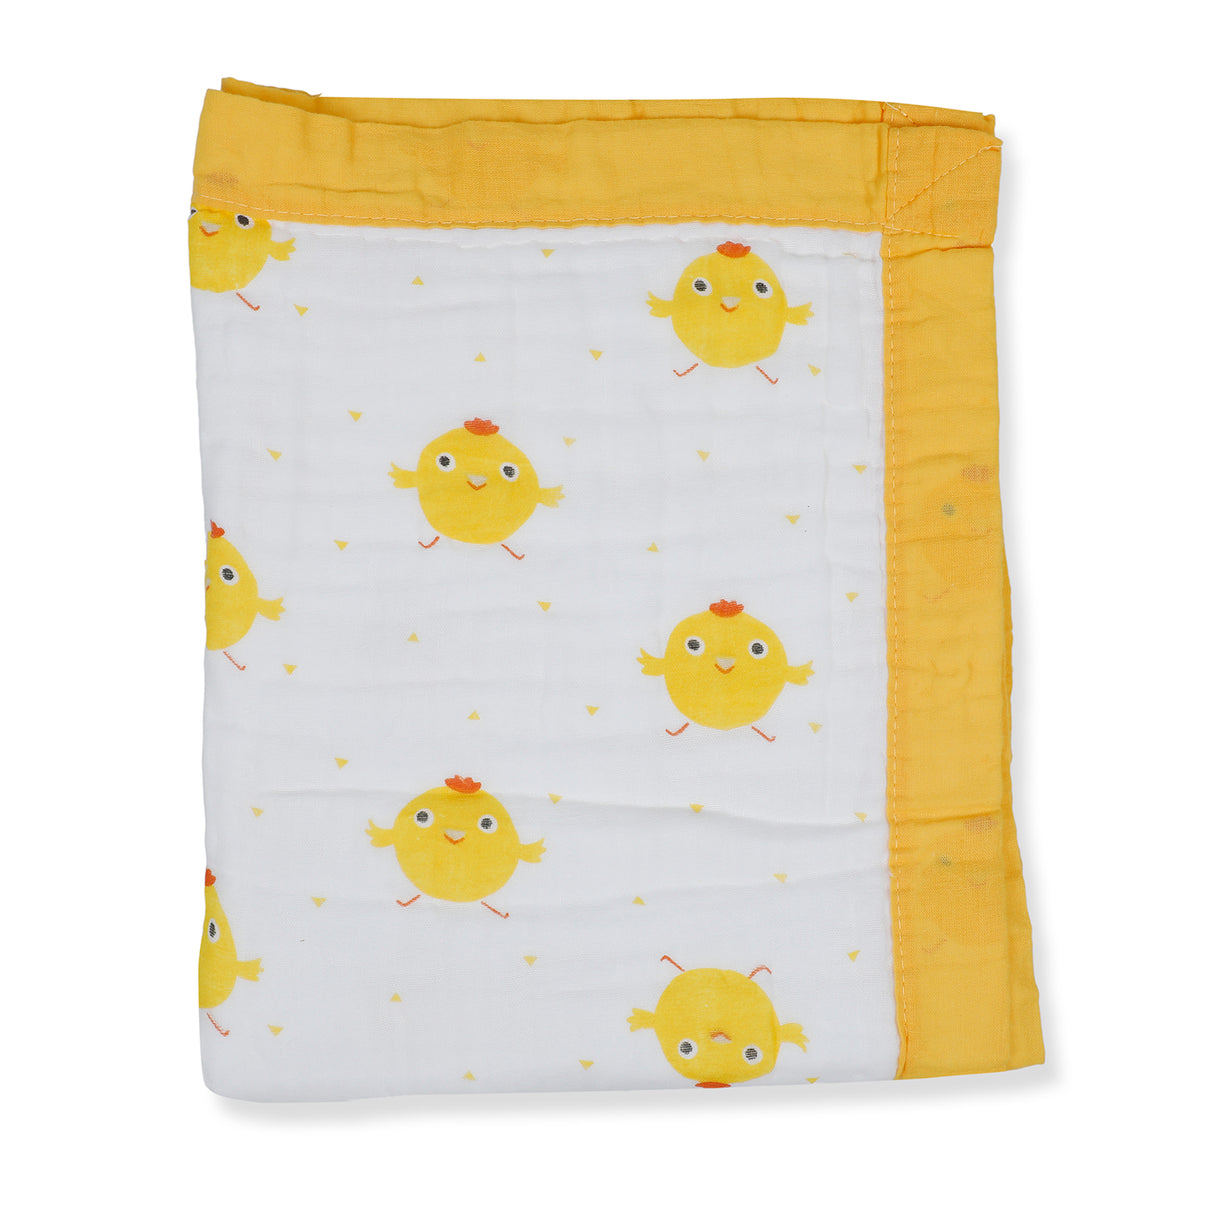 6 Layer Soft Breathable Muslin Cotton Blanket